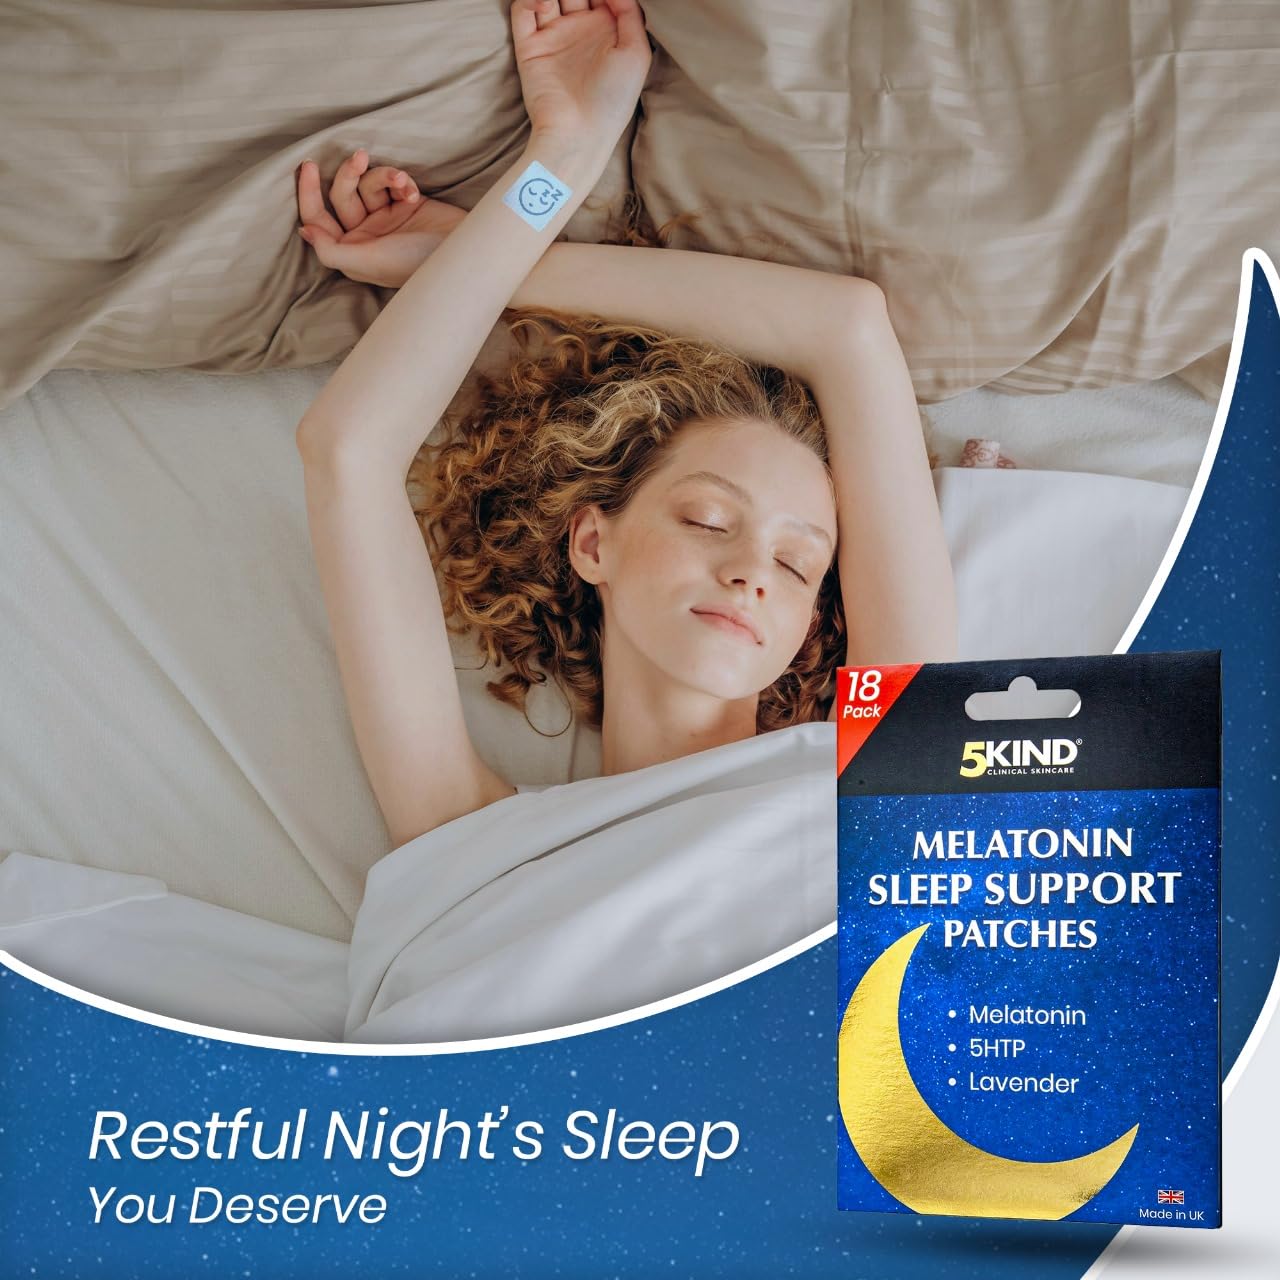 5Kind Melatonin Sleep Patches for Adults - Pack of 18 - High Strength Melatonin, 5HTP & Lavender in Every Patch - Melatonin Patches - Natural Sleep Patches - Made in UK